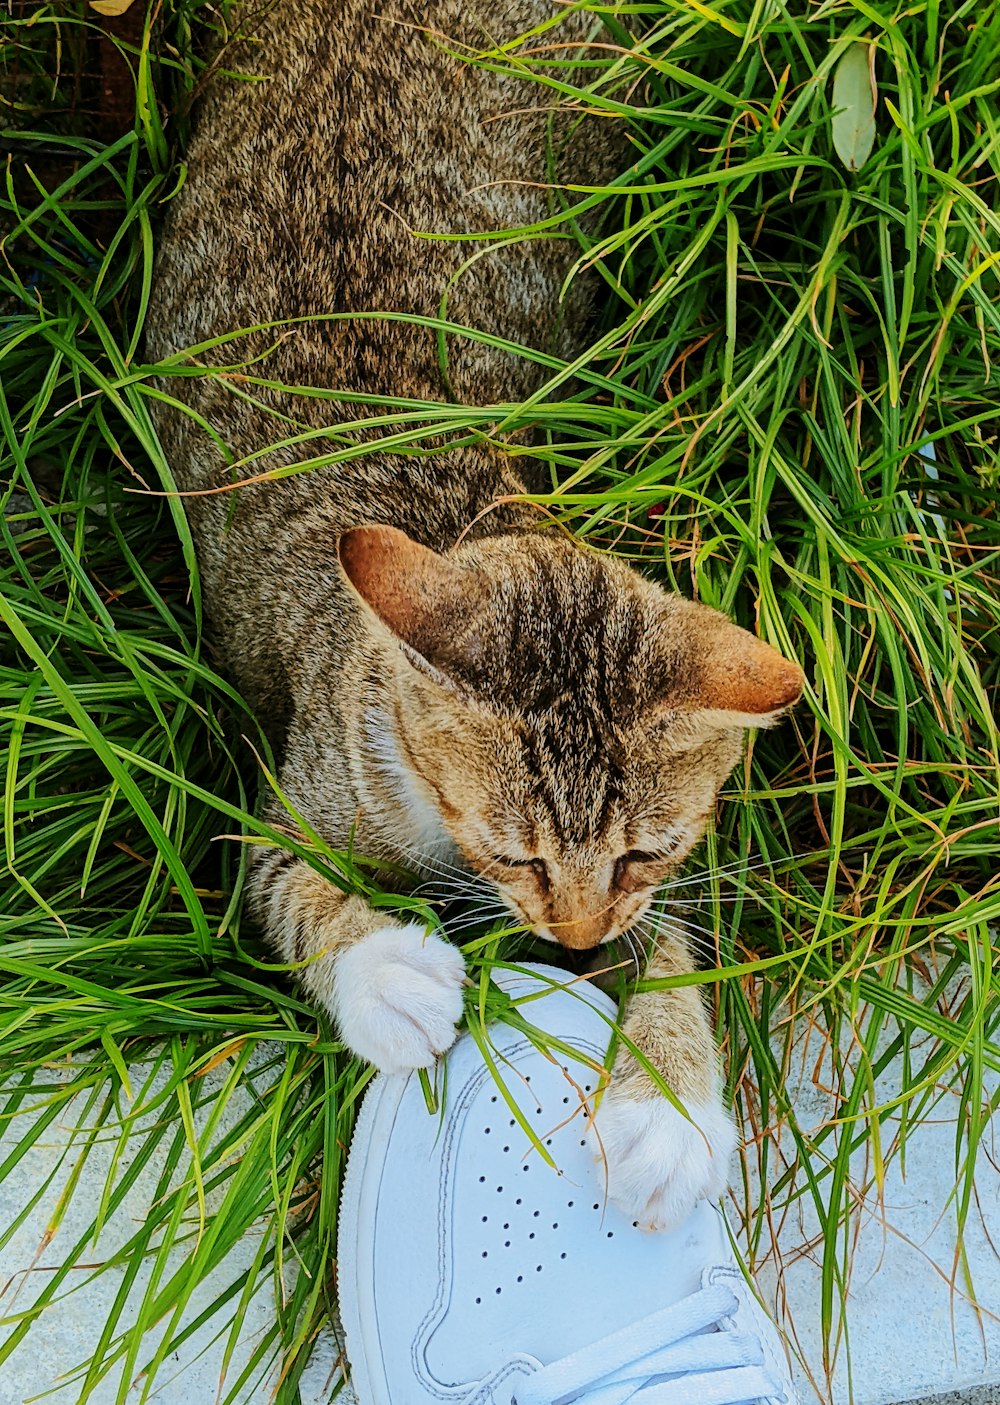 a cat is sniffing a shoe in the grass